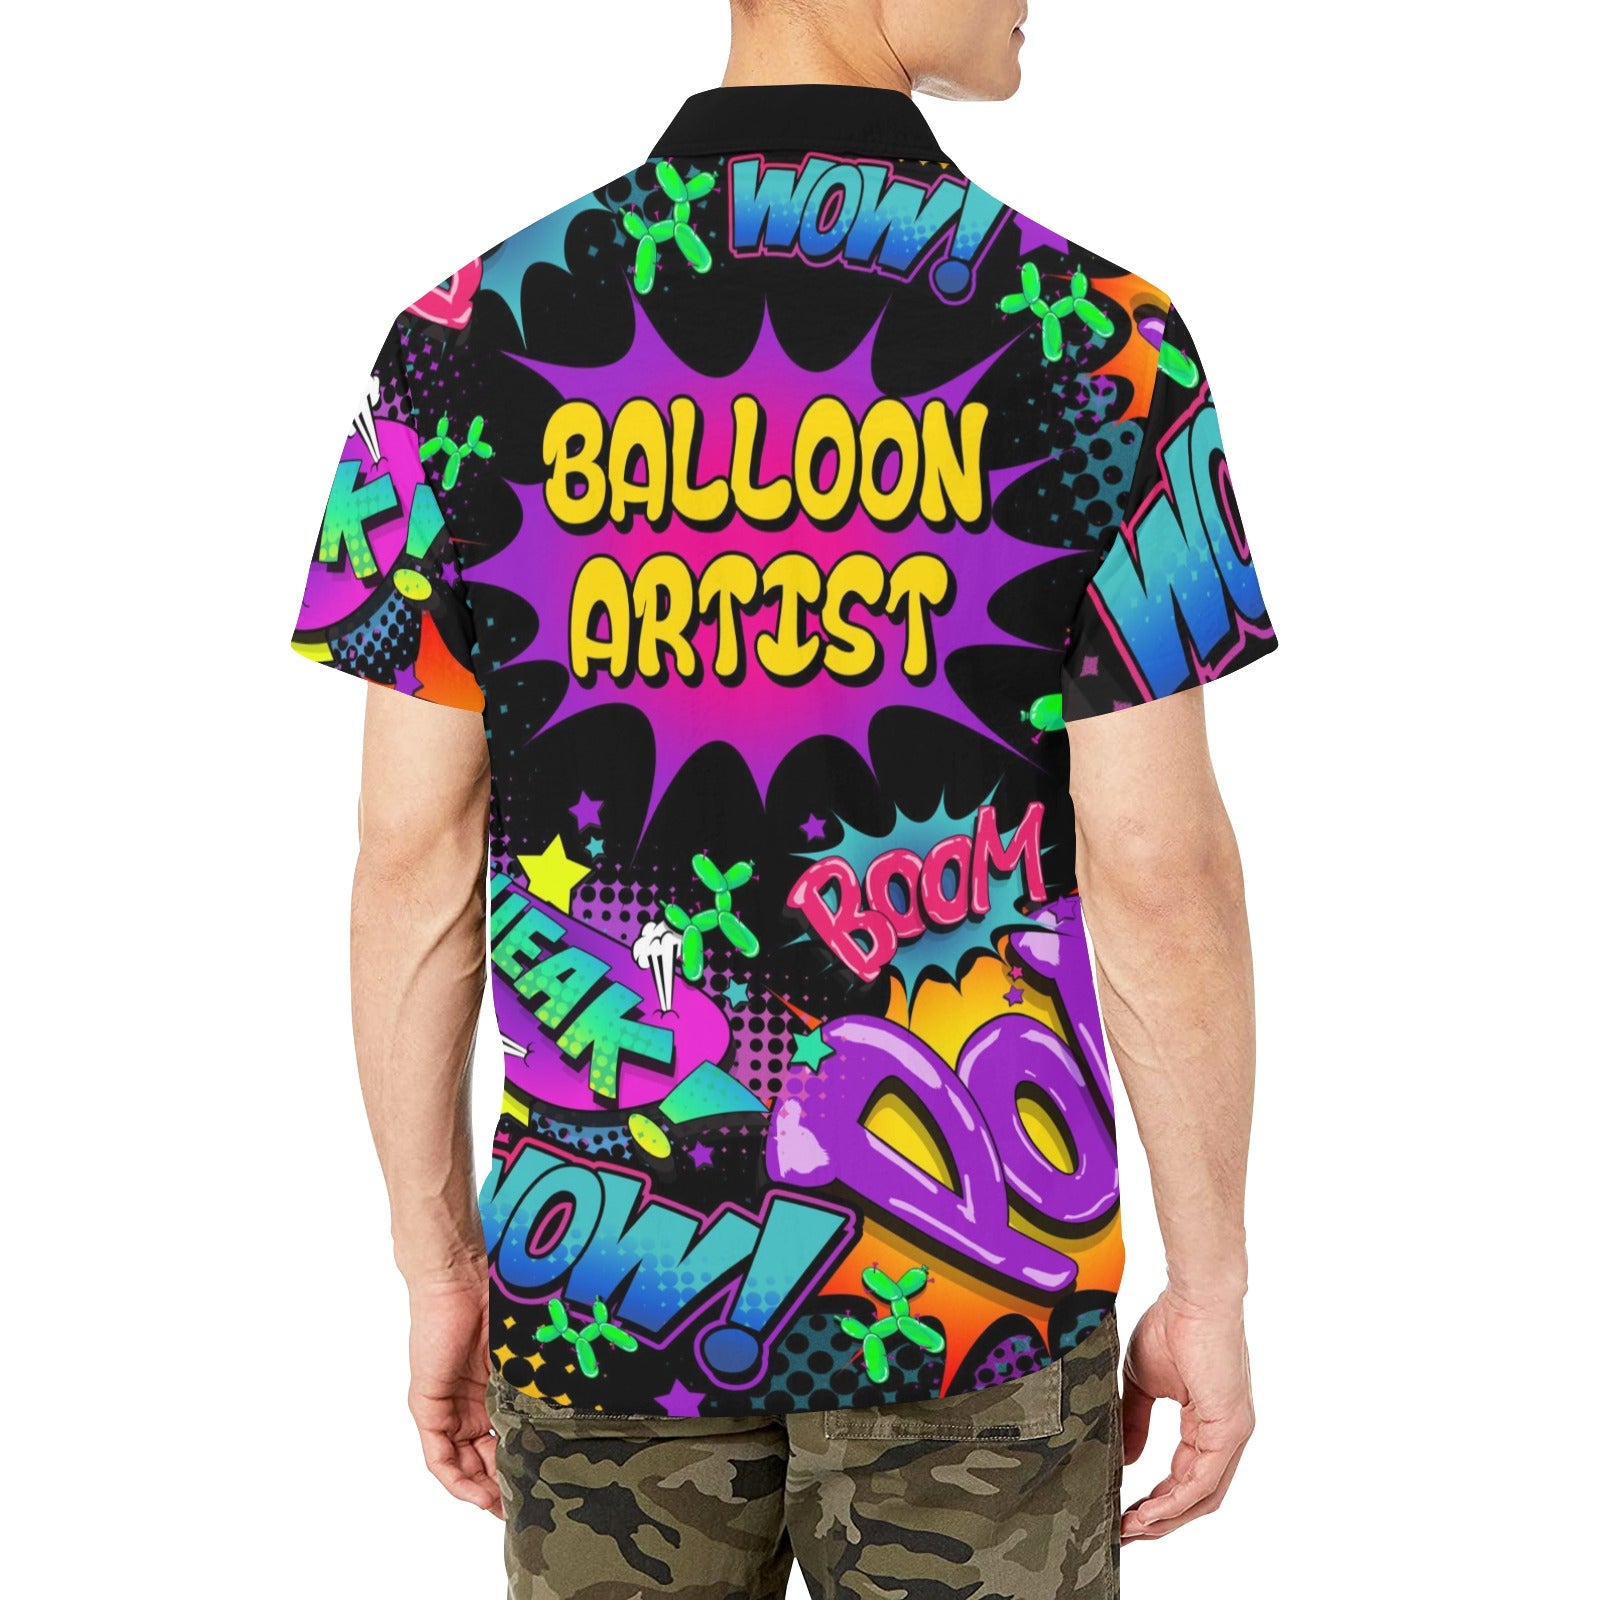 Bright and Colourful Balloon Artists shirt for professional entertainers